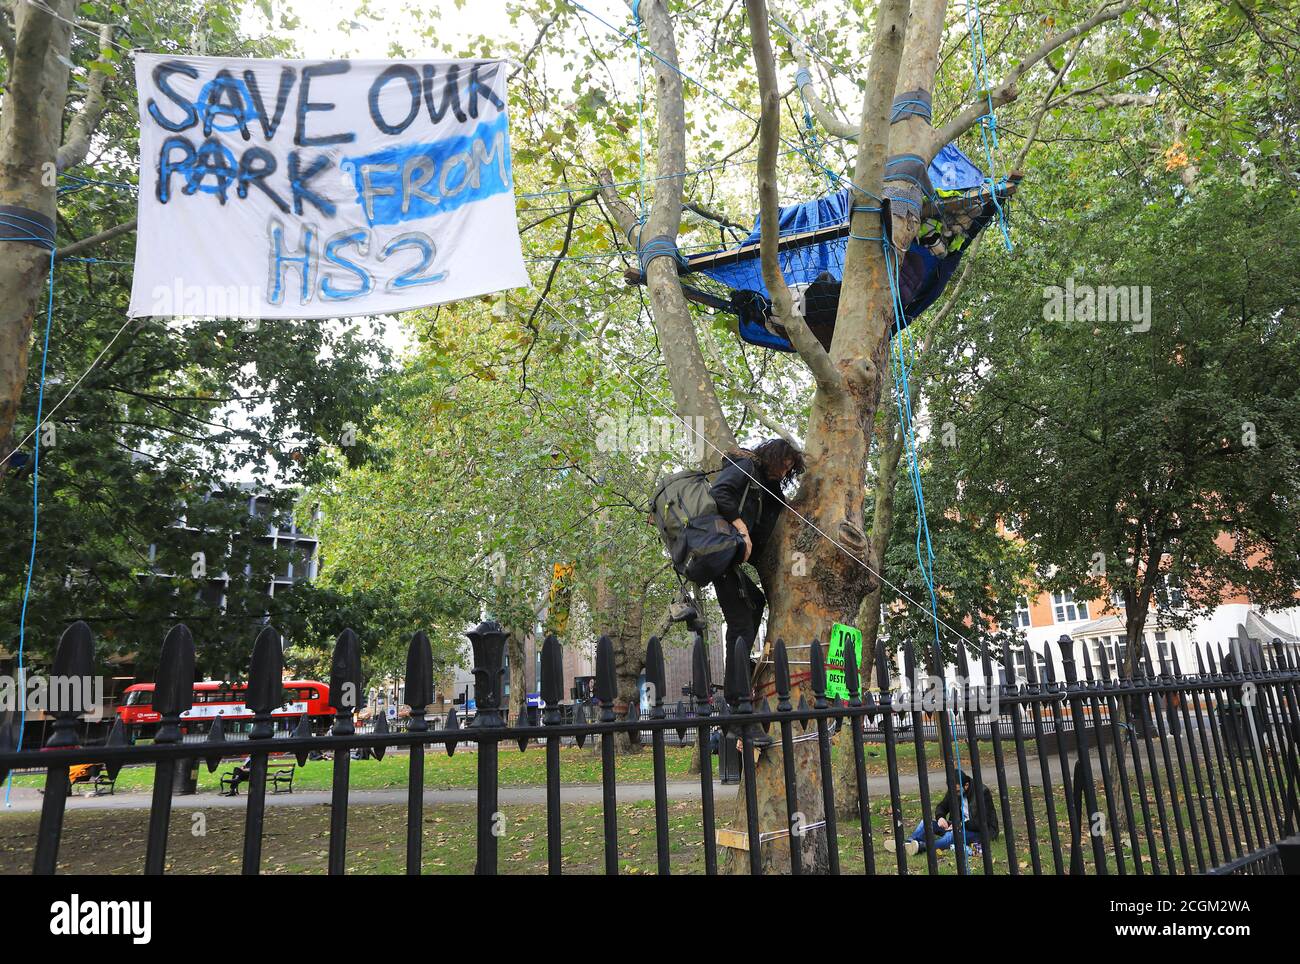 HS2 protest camp in Euston Square Gardens, north London, UK Stock Photo